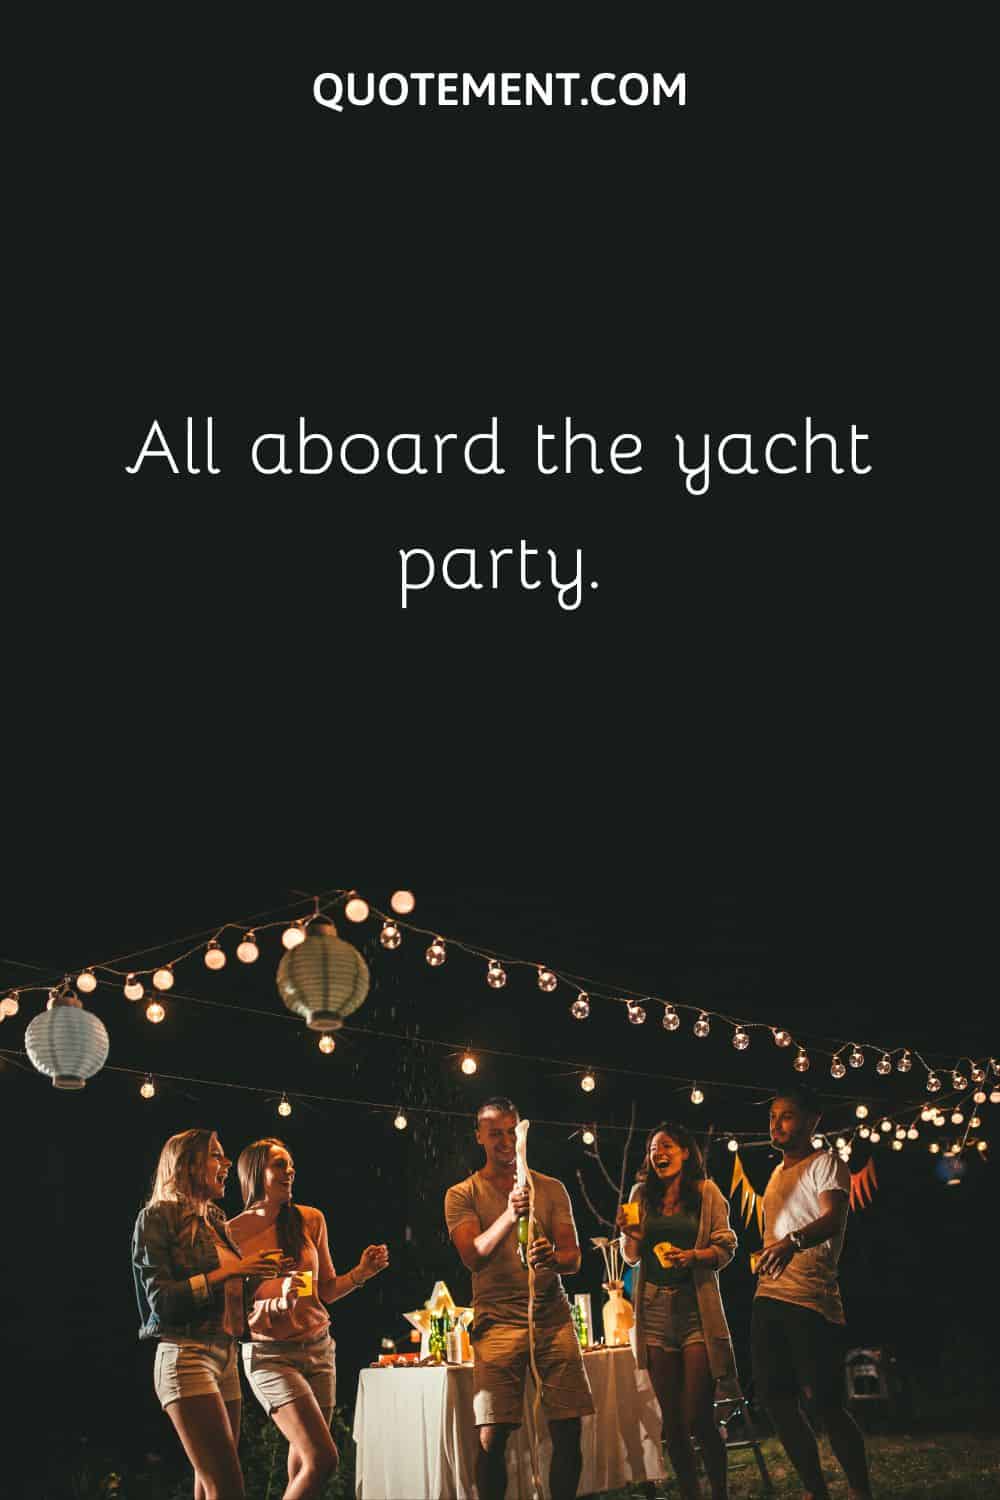 All aboard the yacht party